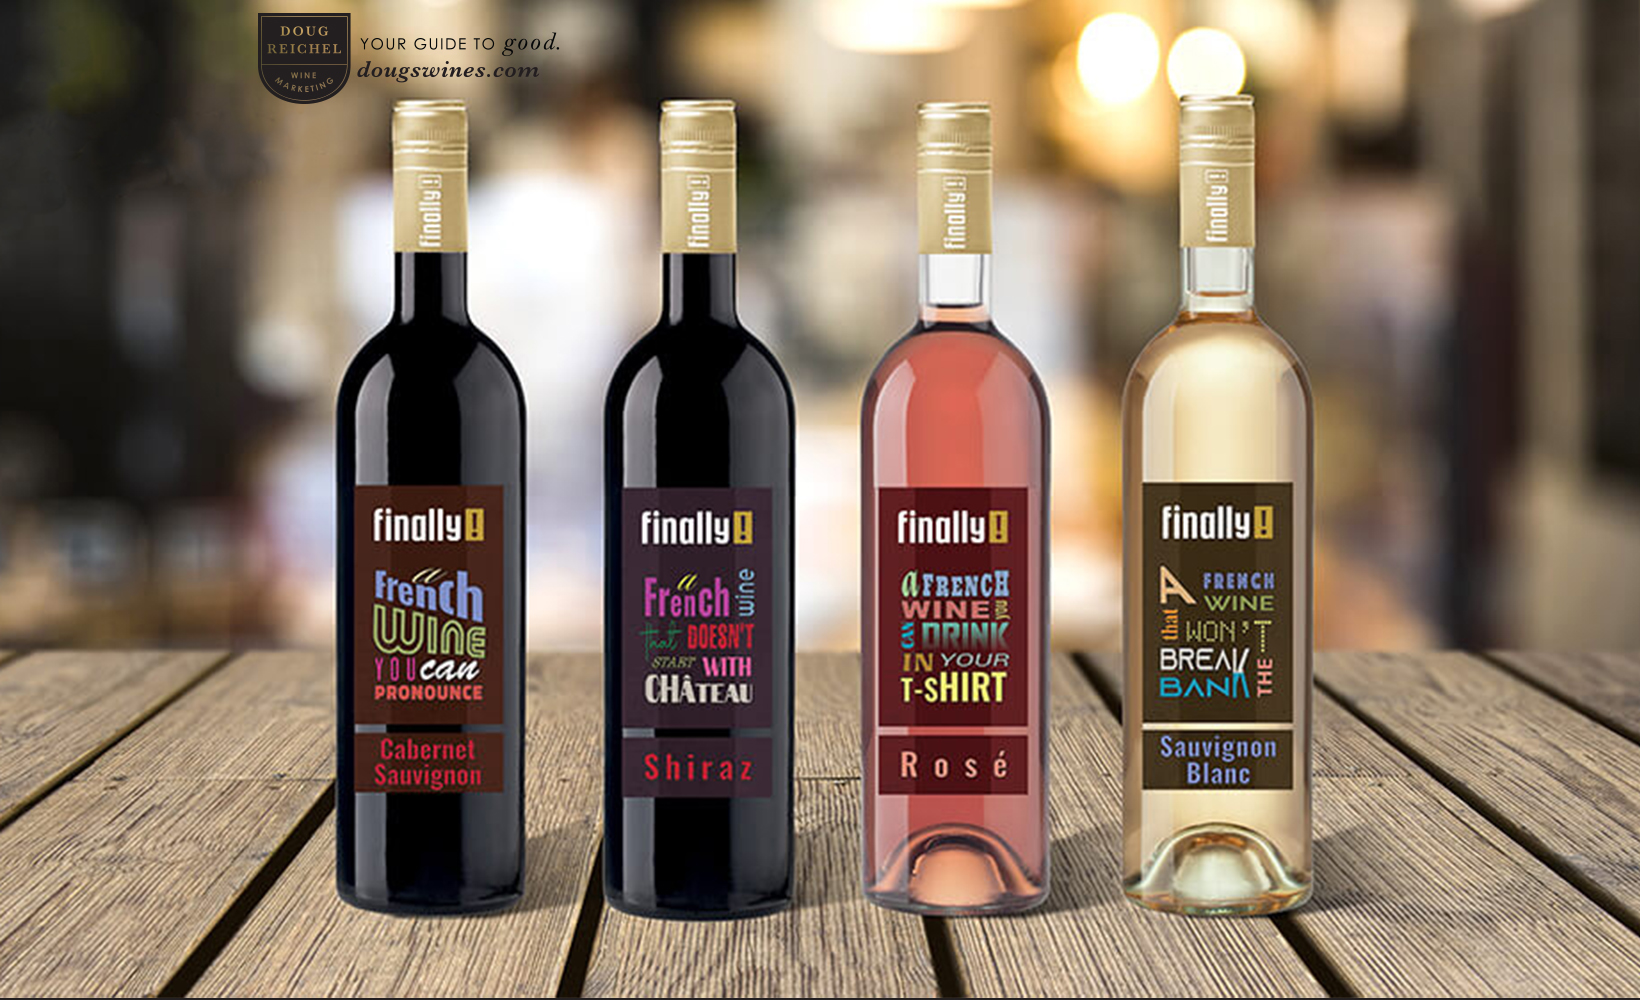 Finally – A sucessfull wine collection in Canada